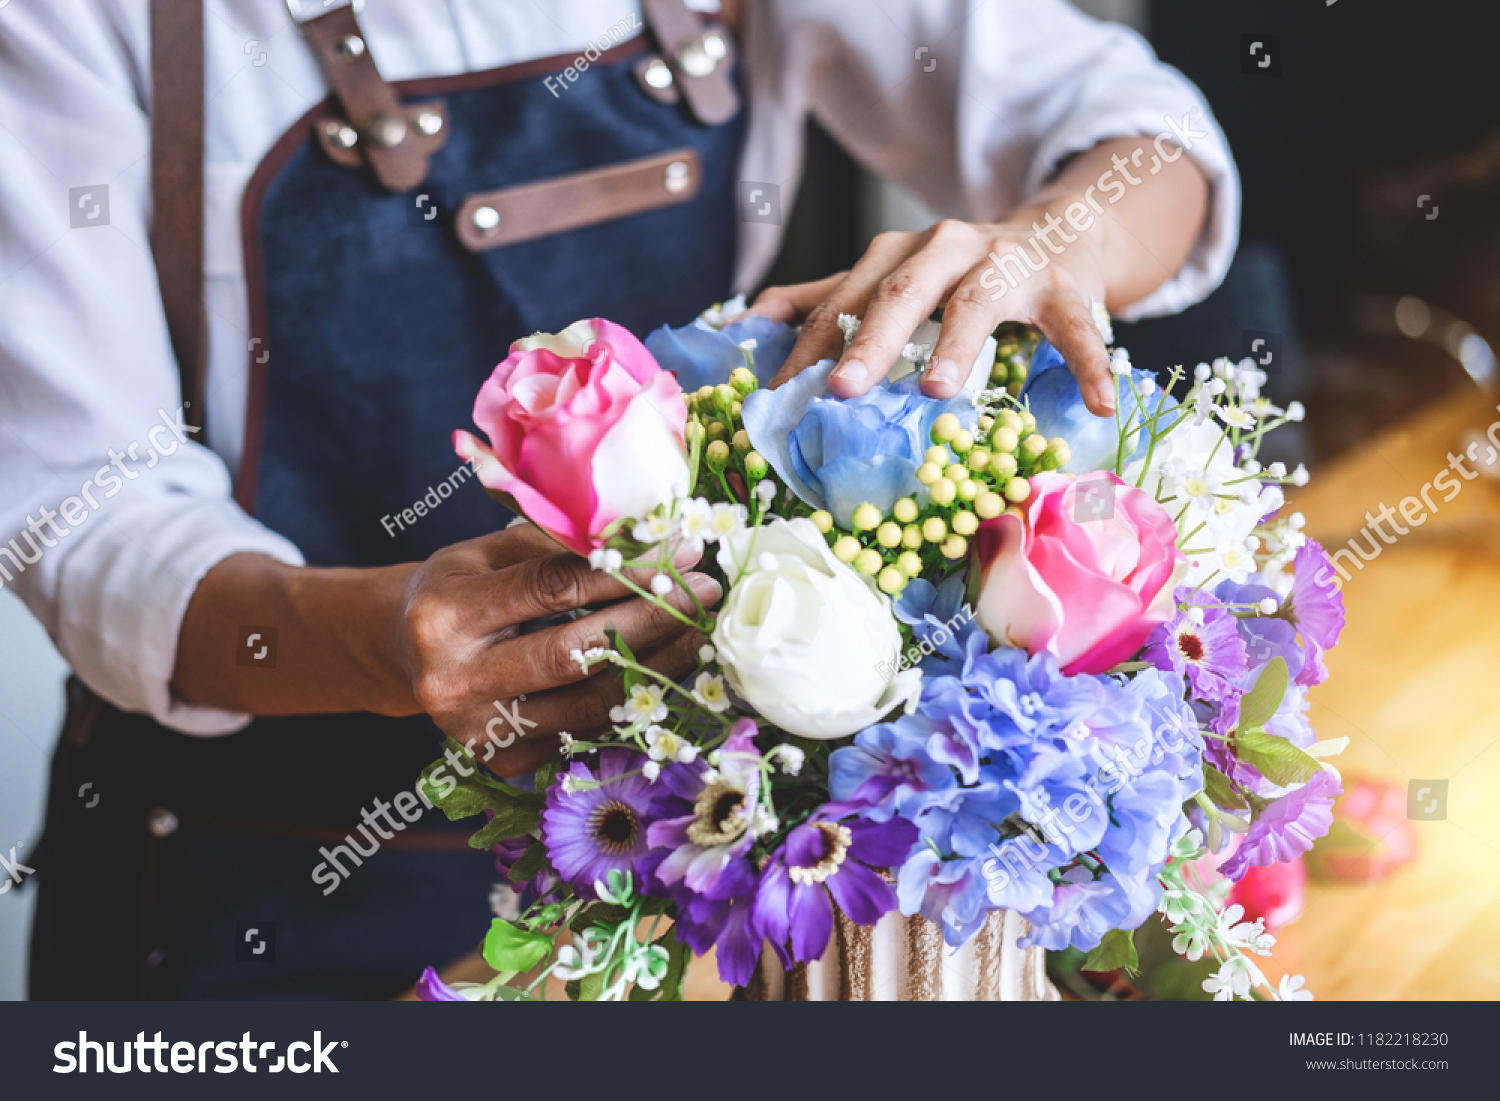 Arranging artificial flowers vest decoration at home, Young woman florist work making organizing diy artificial flower, craft and hand made concept. #1182218230